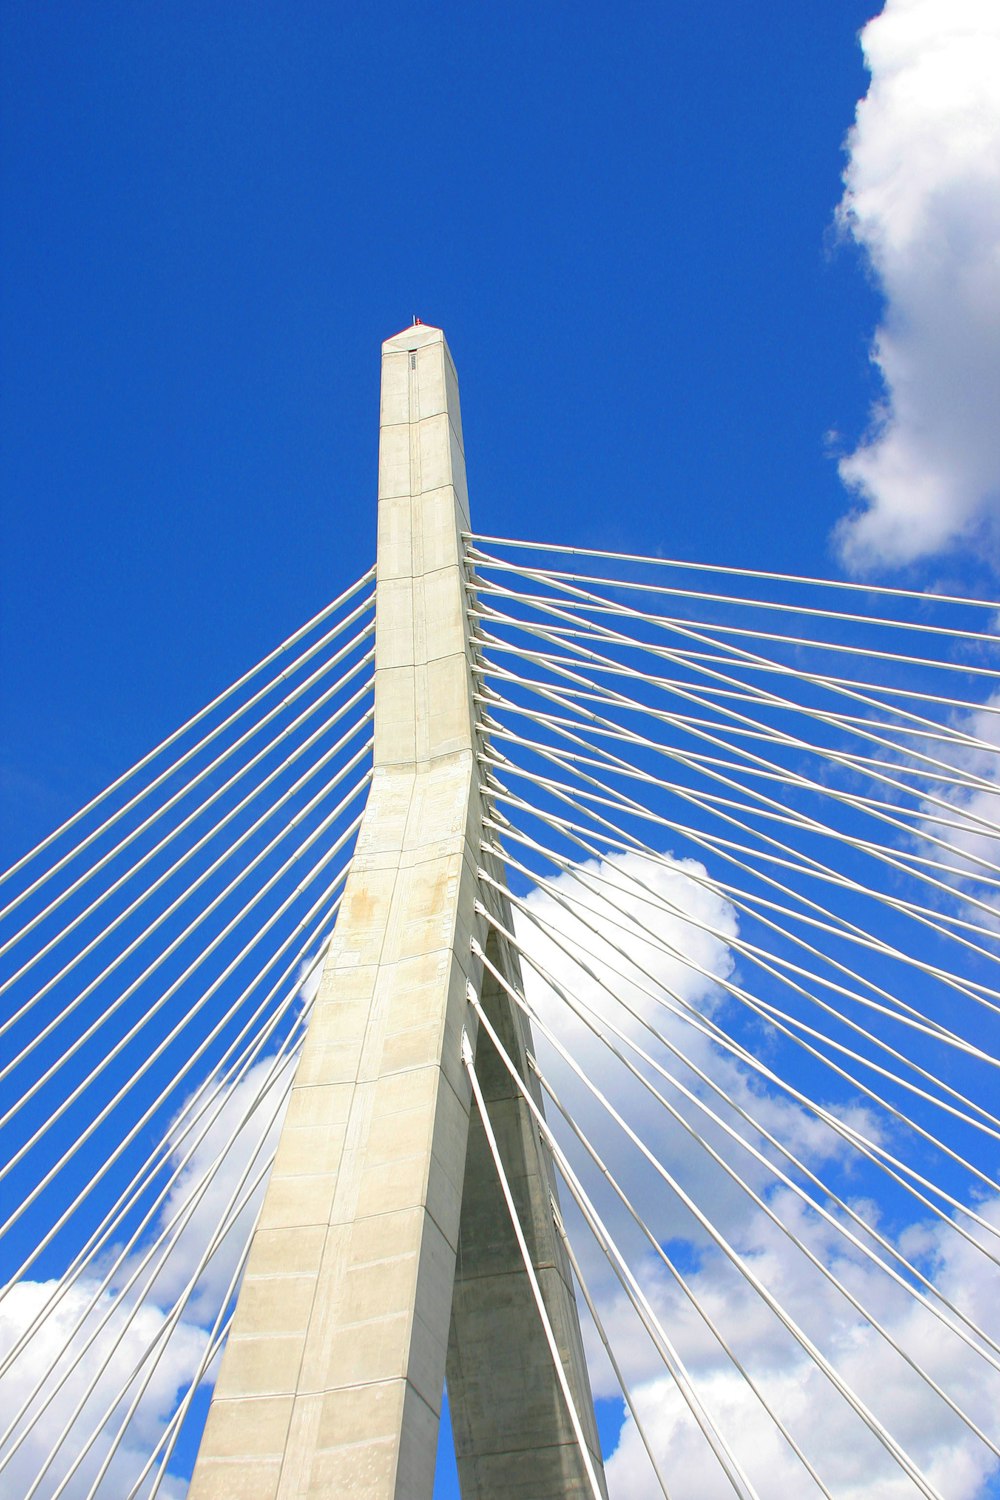 a tall bridge with cables with Leonard P. Zakim Bunker Hill Memorial Bridge in the background